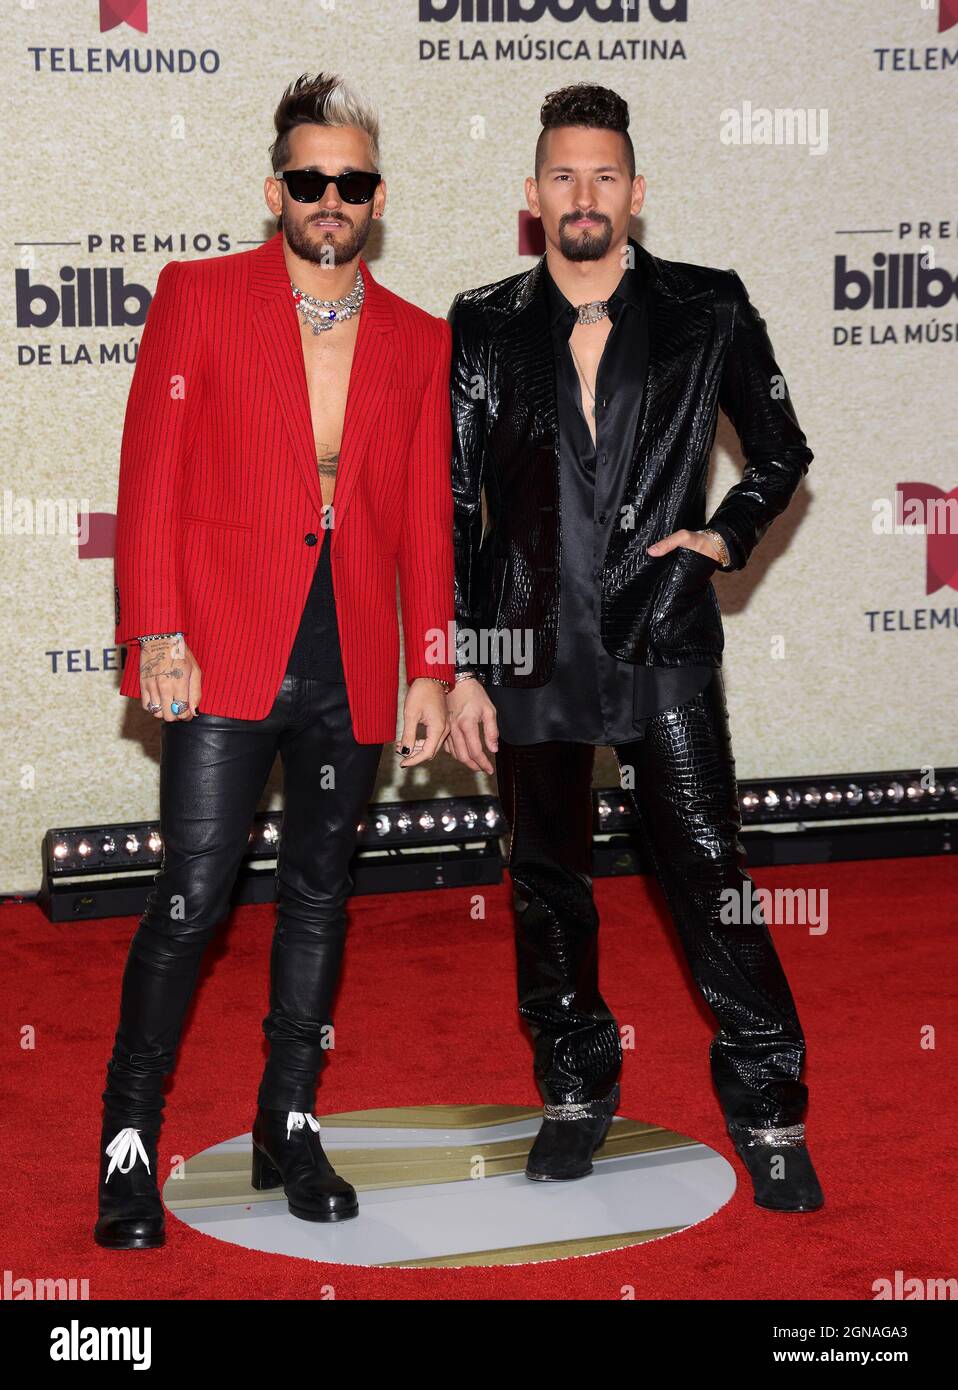 Miami, United States Of America. 23rd Sep, 2021. PREMIOS BILLBOARD DE LA MÚSICA LATINA 2021 -- Mau y Ricky on the red carpet at the Watsco Center in Coral Gables, FL on September 23, 2021 (Photo by Alberto E. Tamargo/Sipa USA) Credit: Sipa USA/Alamy Live News Stock Photo